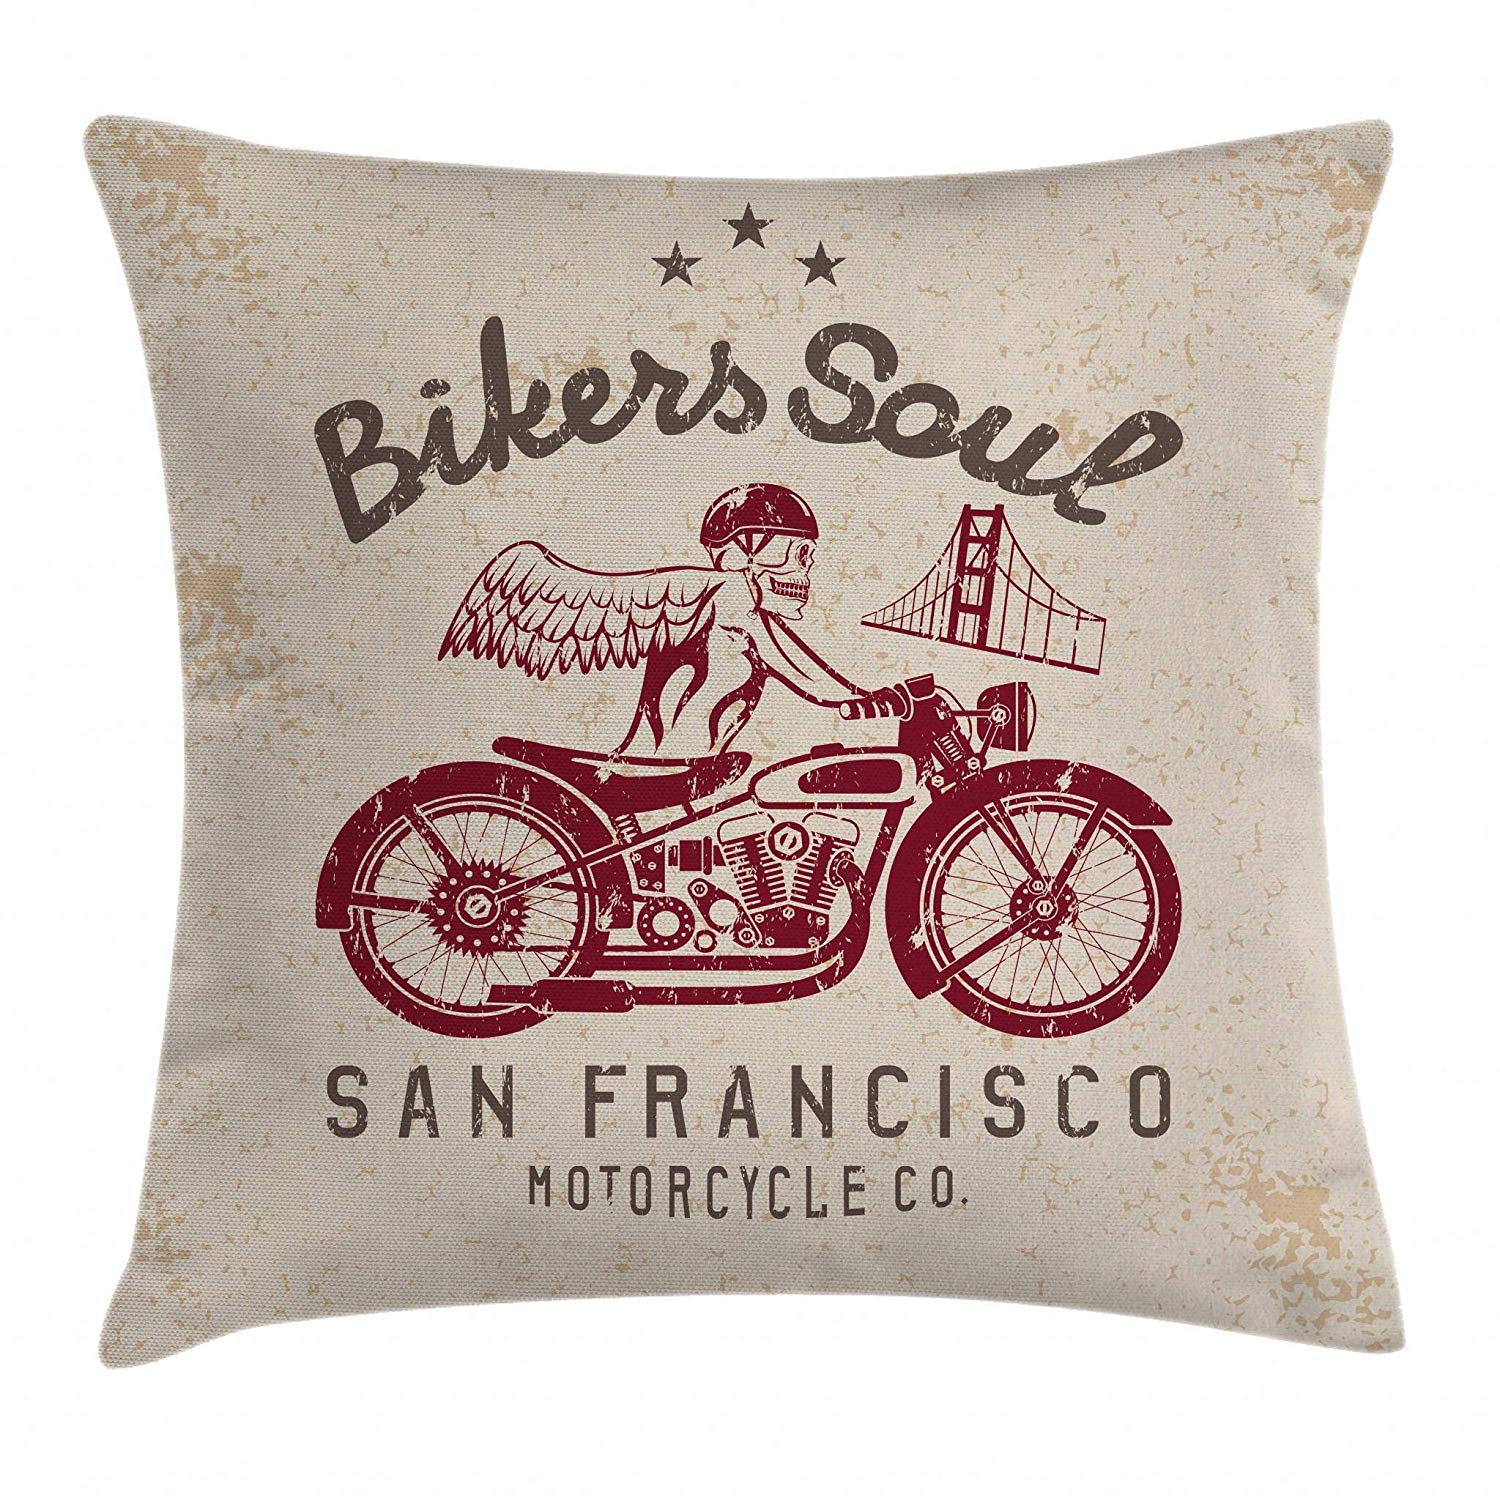 a pillow with a winged skeleton riding a motorcycle